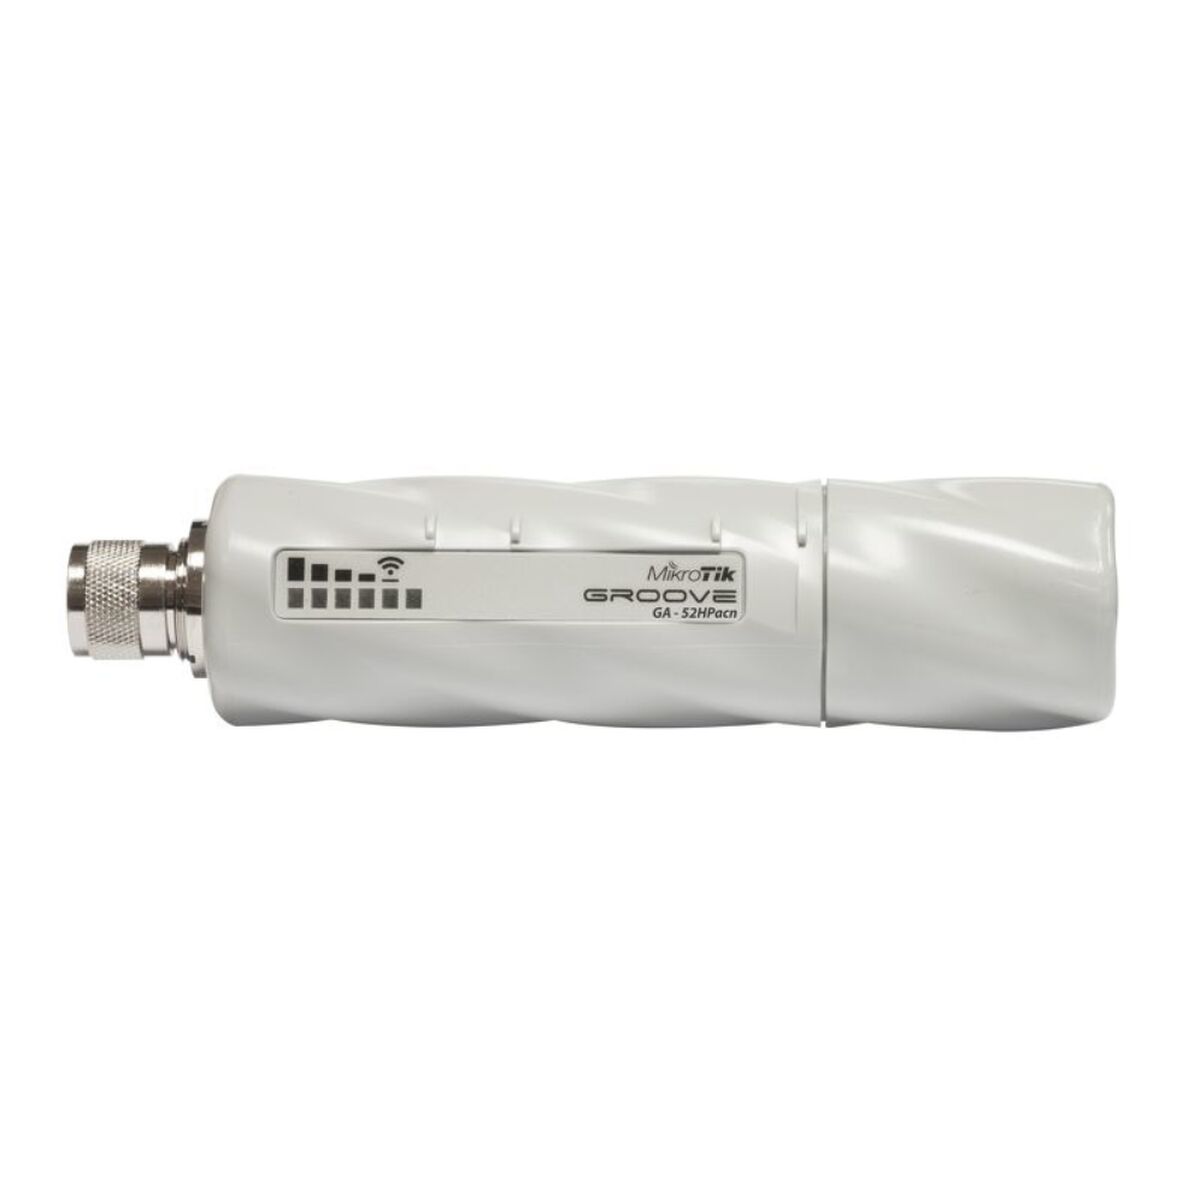 Access point Mikrotik RBGrooveGA-52HPacn White, Mikrotik, Computing, Network devices, access-point-mikrotik-rbgroovega-52hpacn-white, Brand_Mikrotik, category-reference-2609, category-reference-2803, category-reference-2820, category-reference-t-19685, category-reference-t-19914, Condition_NEW, networks/wiring, Price_100 - 200, Teleworking, RiotNook